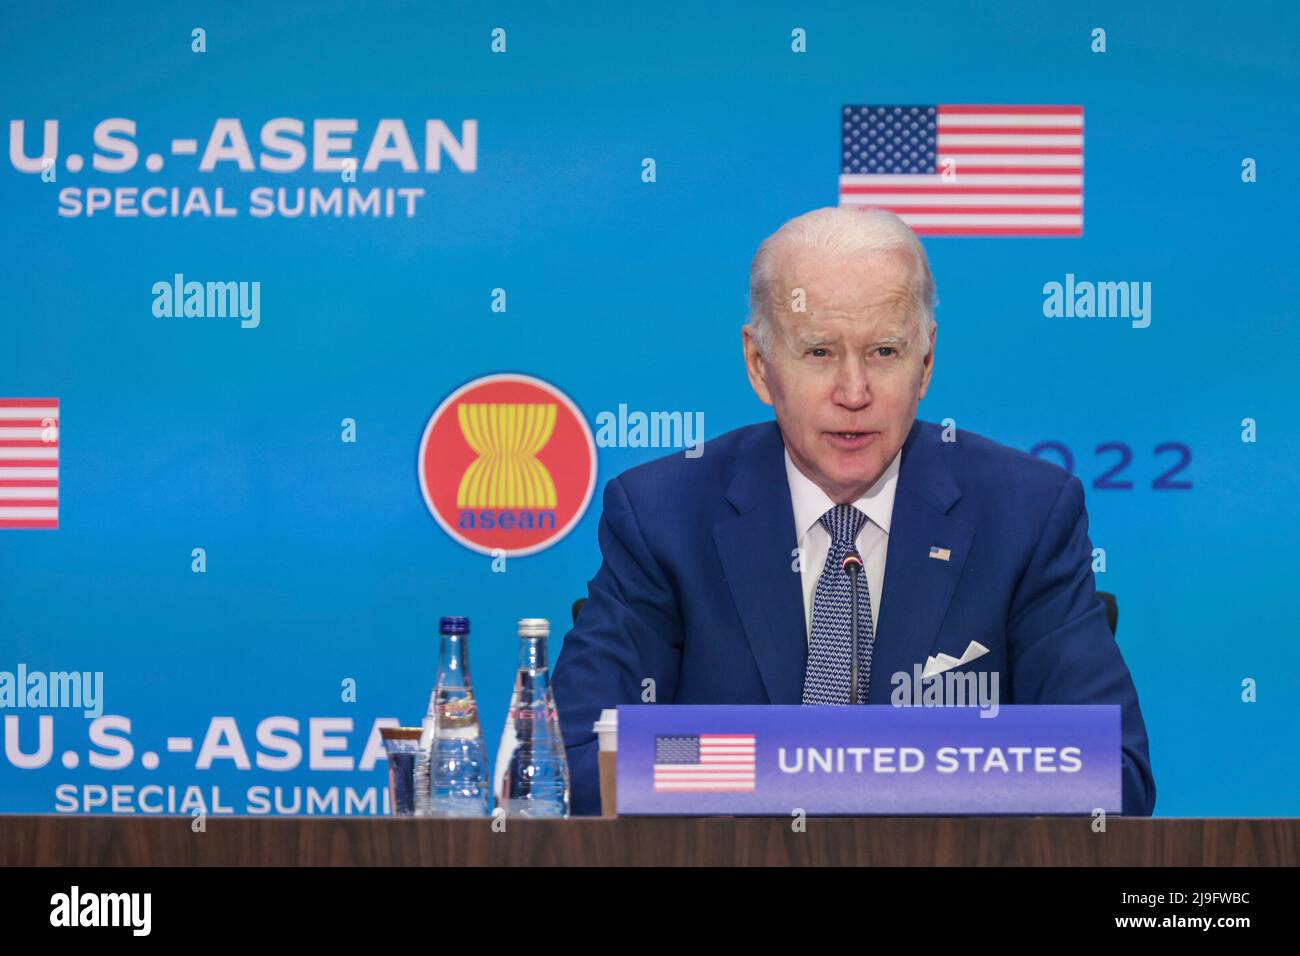 United States President Joe Biden makes remarks as he attends the U.S.-ASEAN Special Summit to commemorate 45 years of U.S.-ASEAN relations and strengthen ASEANs central role in delivering sustainable solutions to the regions most pressing challenges held at the Department of State, Harry S. Truman Building in Washington, DC on May 13, 2022. Credit: Oliver Contreras/Pool via CNP Stock Photo